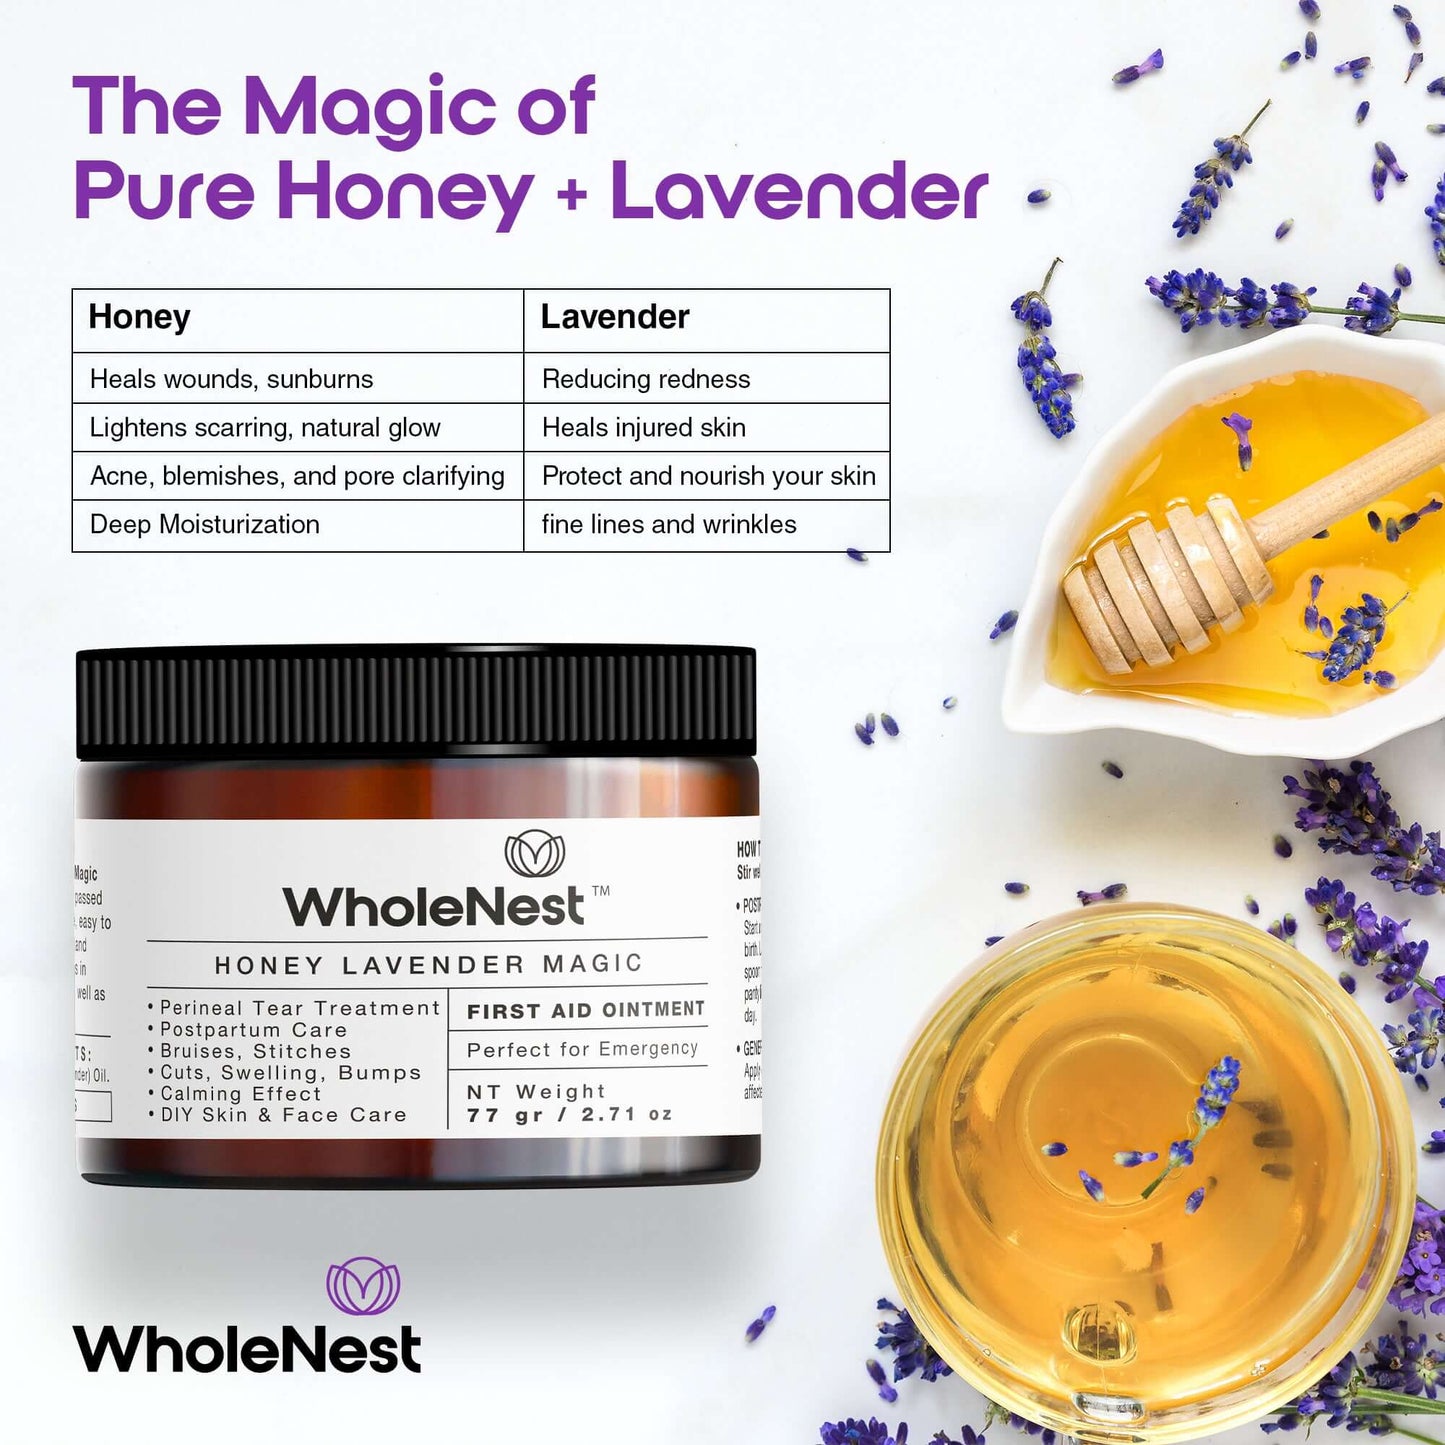 Honey Lavender Magic This organic balm helps relieve perineal tears and postpartum pain, reduces swelling and pressure-like sensations and speeds up healing time. It is perfect for emergency use for bruises, stitches, cuts, swellings, and bumps, and even for DIY skin & face care. 